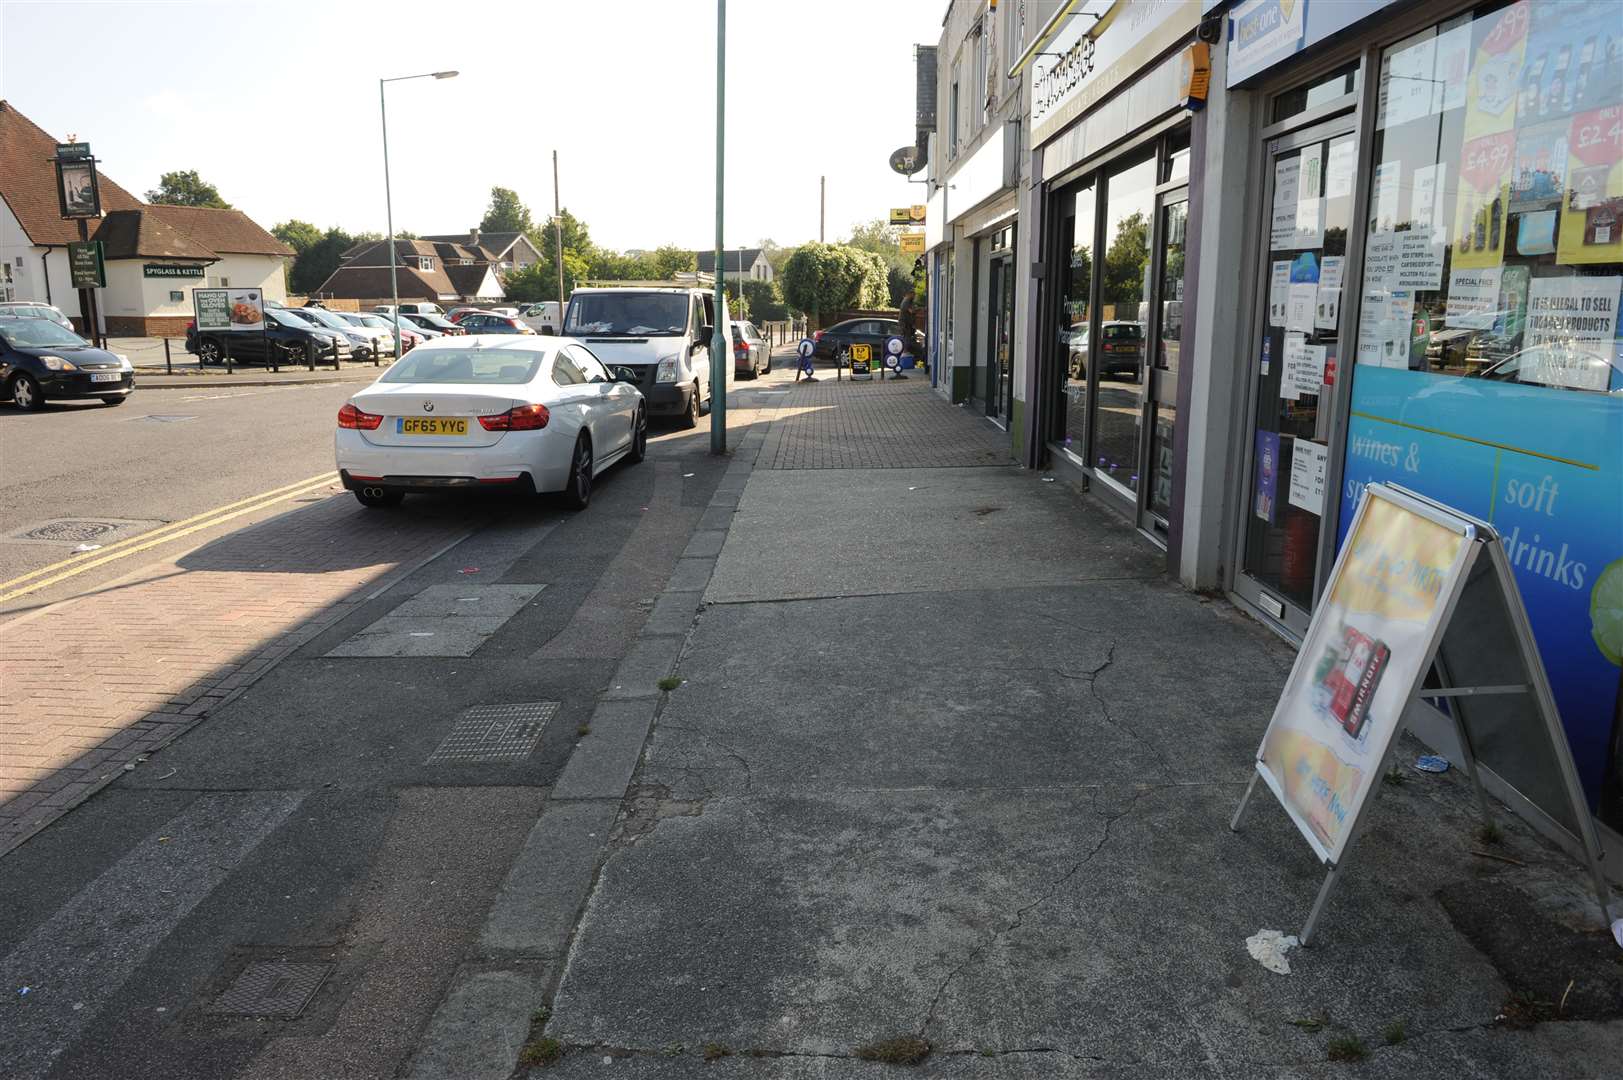 Parking problems are plaguing the shopping parade in Wigmore Road